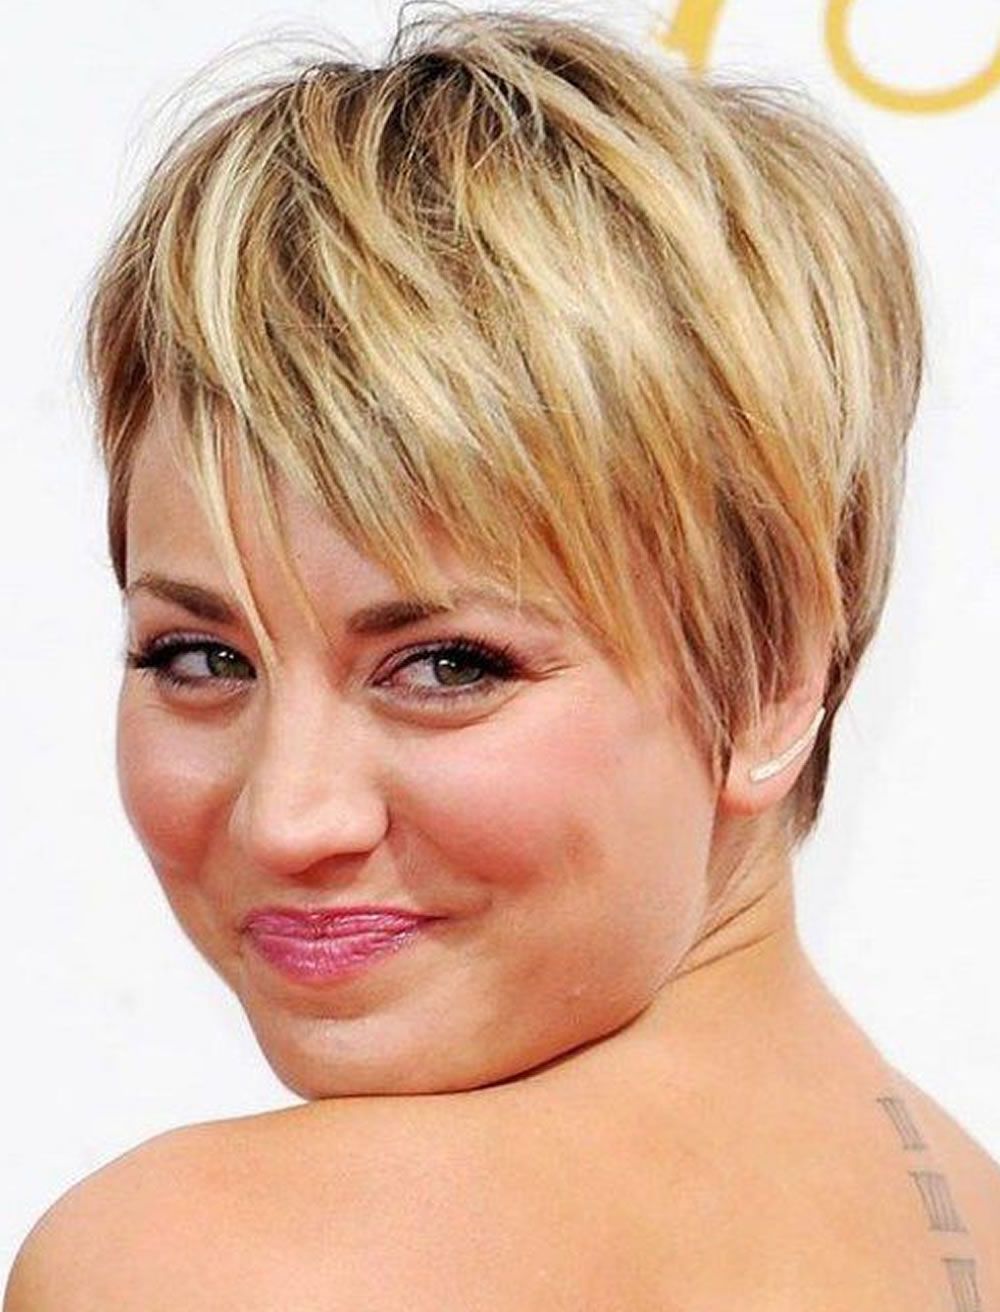 Short Haircuts For Round Face Thin Hair Ideas For 2018 – Page 2 Throughout Short Hairstyles For Thin Hair And Round Faces (View 12 of 25)